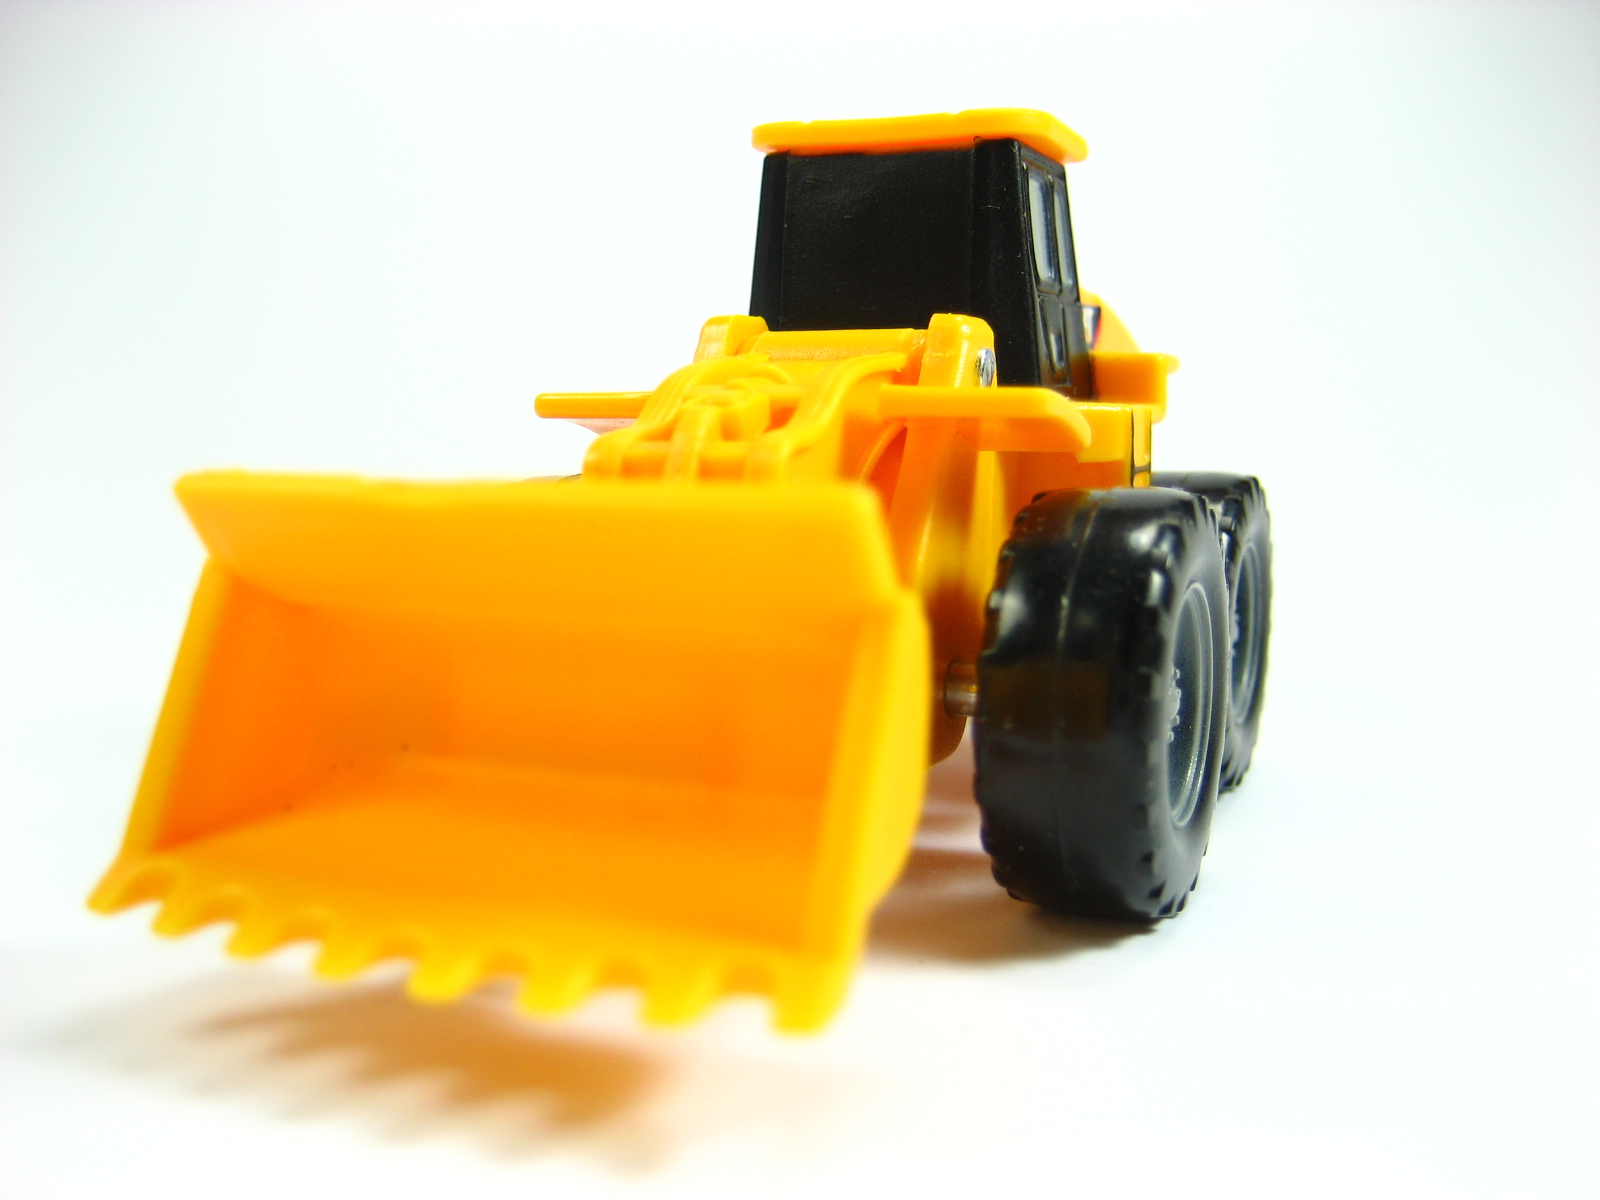 a plastic construction truck toy sitting up against a white background